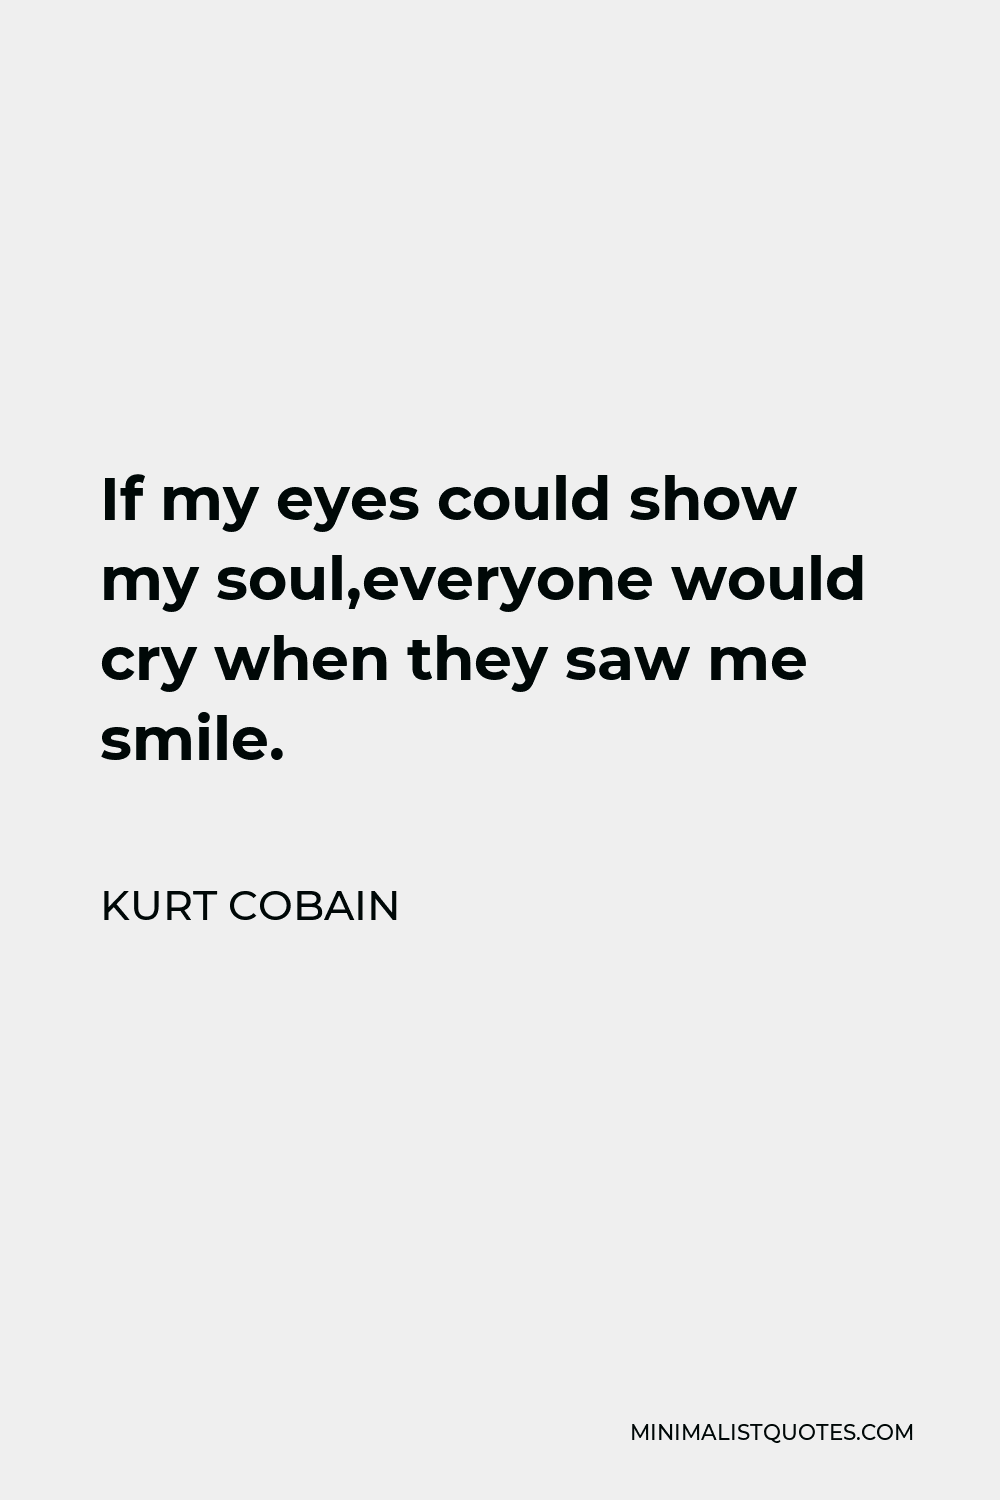 Kurt Cobain Quote - If my eyes could show my soul,everyone would cry when they saw me smile.